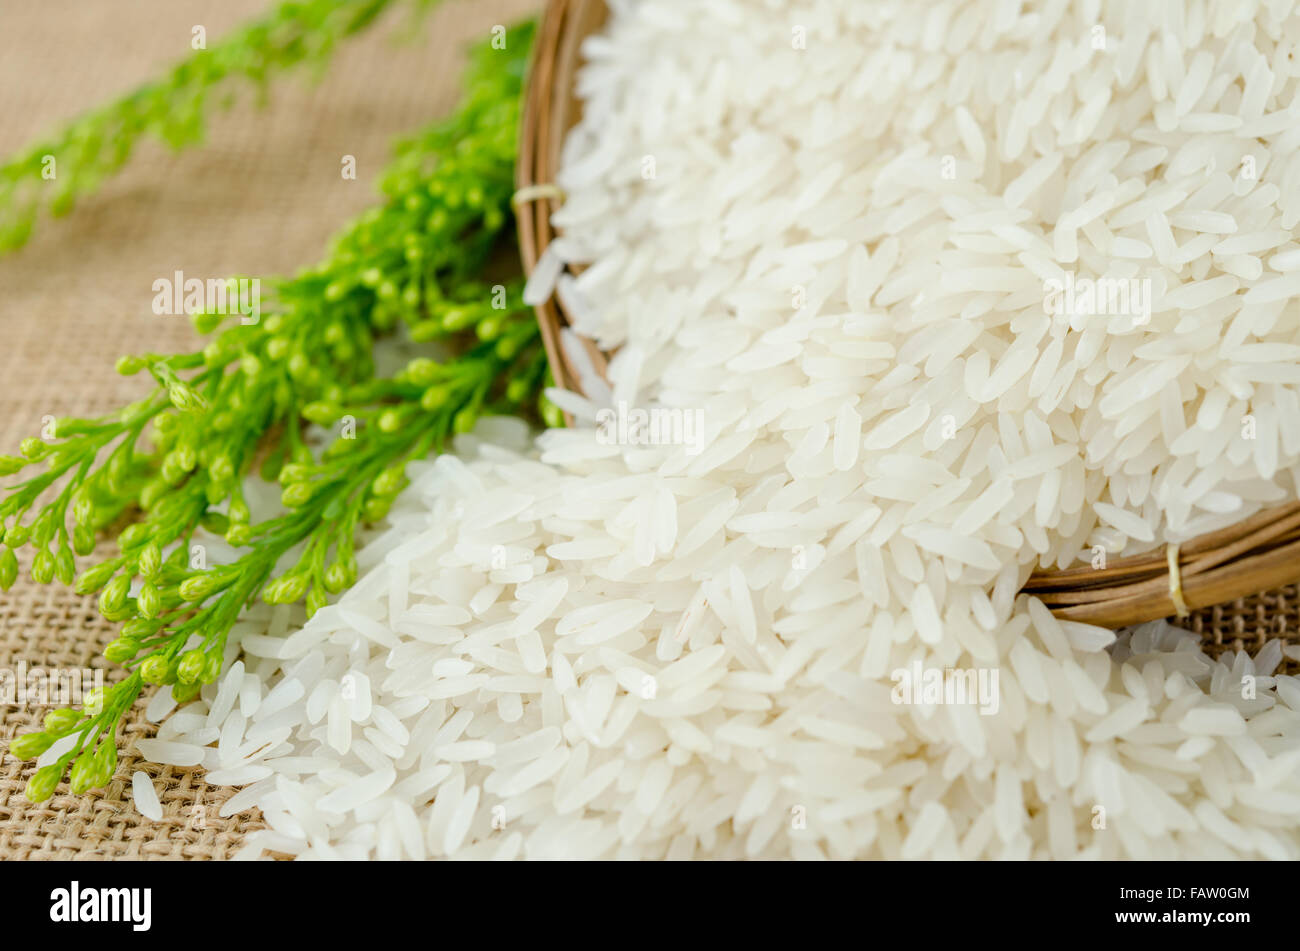 Jasmine rice in weave wooden basket with flower on sack background. Stock Photo